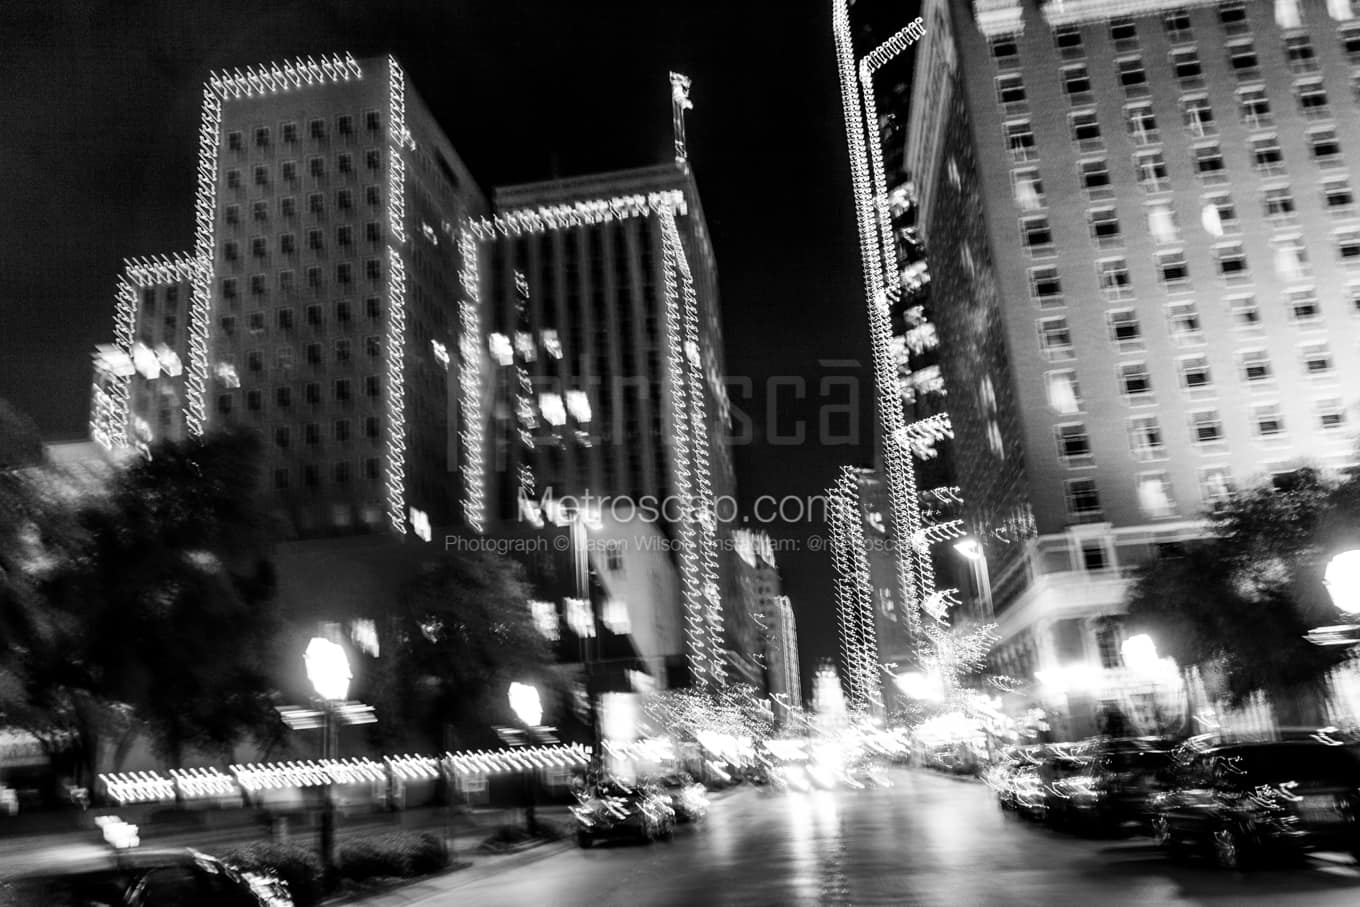 Black & White Fort Worth Architecture Pictures